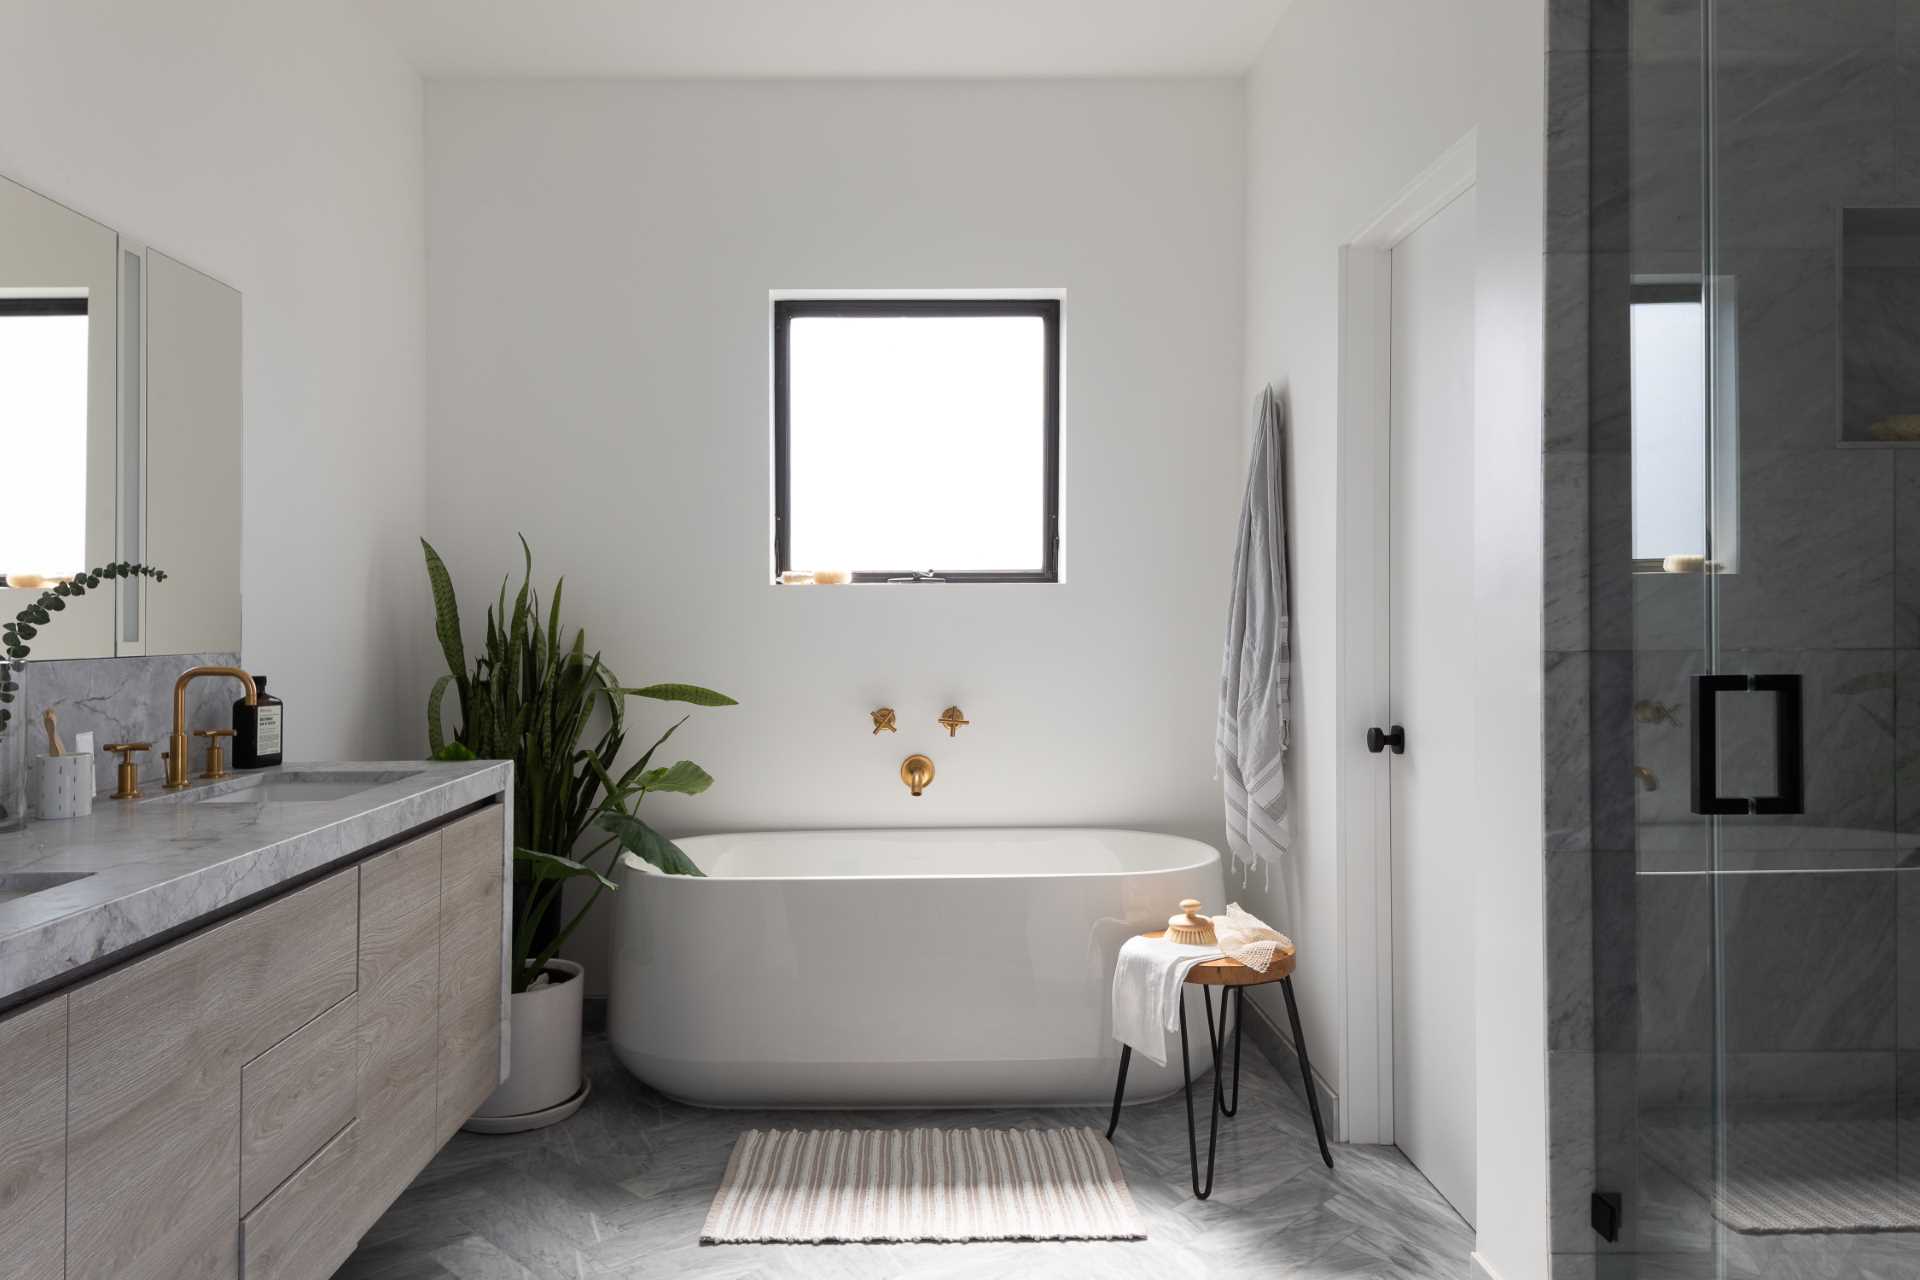 This modern en-suite bathroom includes a freestanding bathtub, a double vanity, and glass-enclosed walk-in shower.